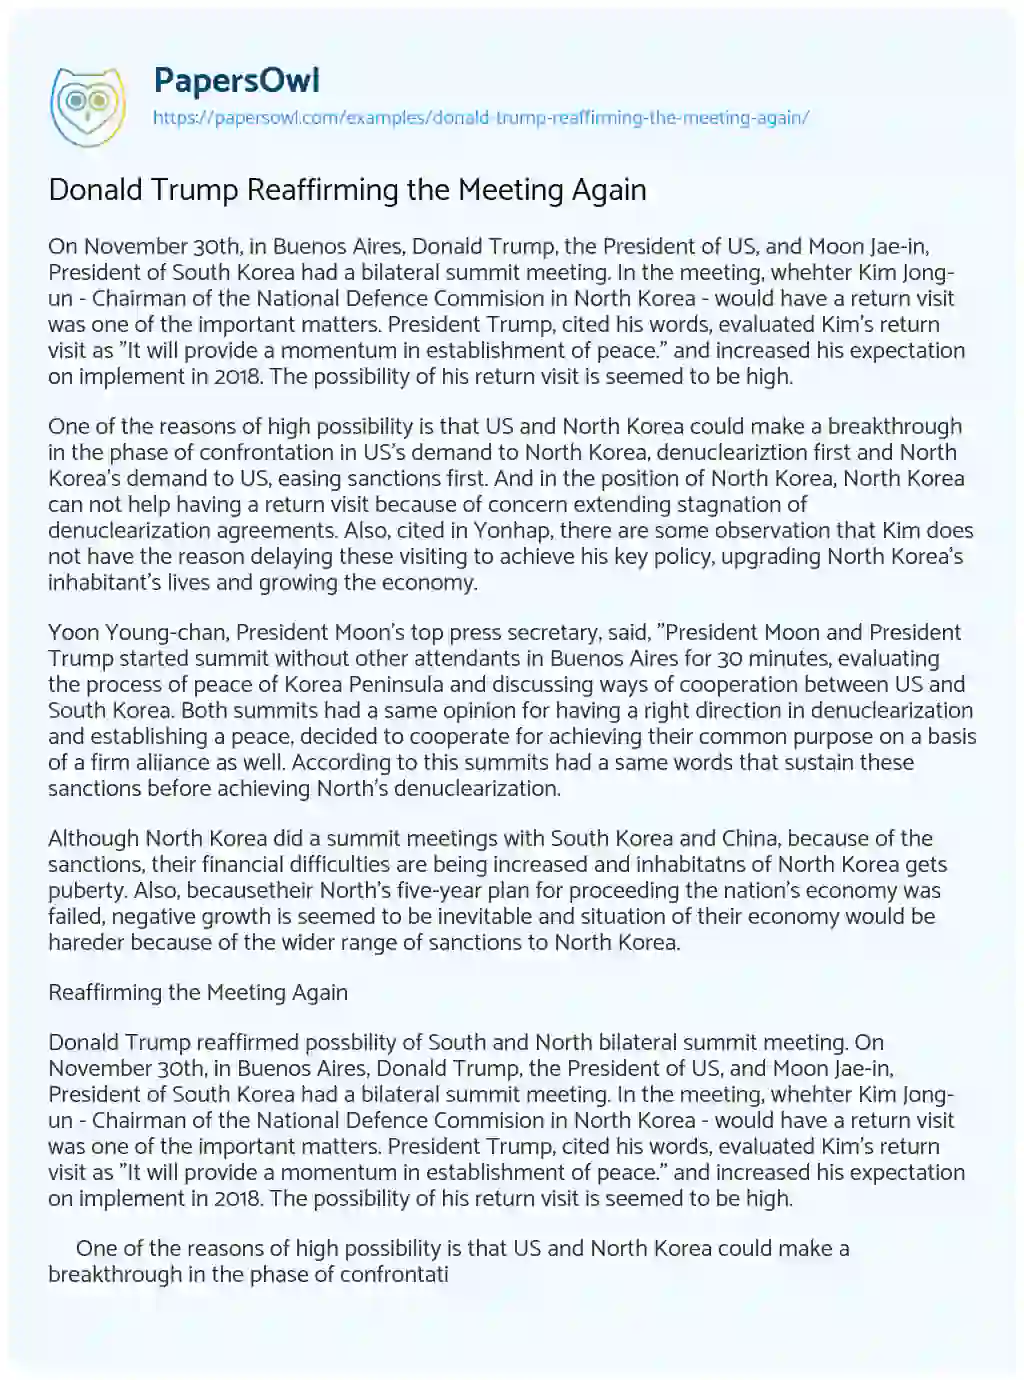 Essay on Donald Trump Reaffirming the Meeting again